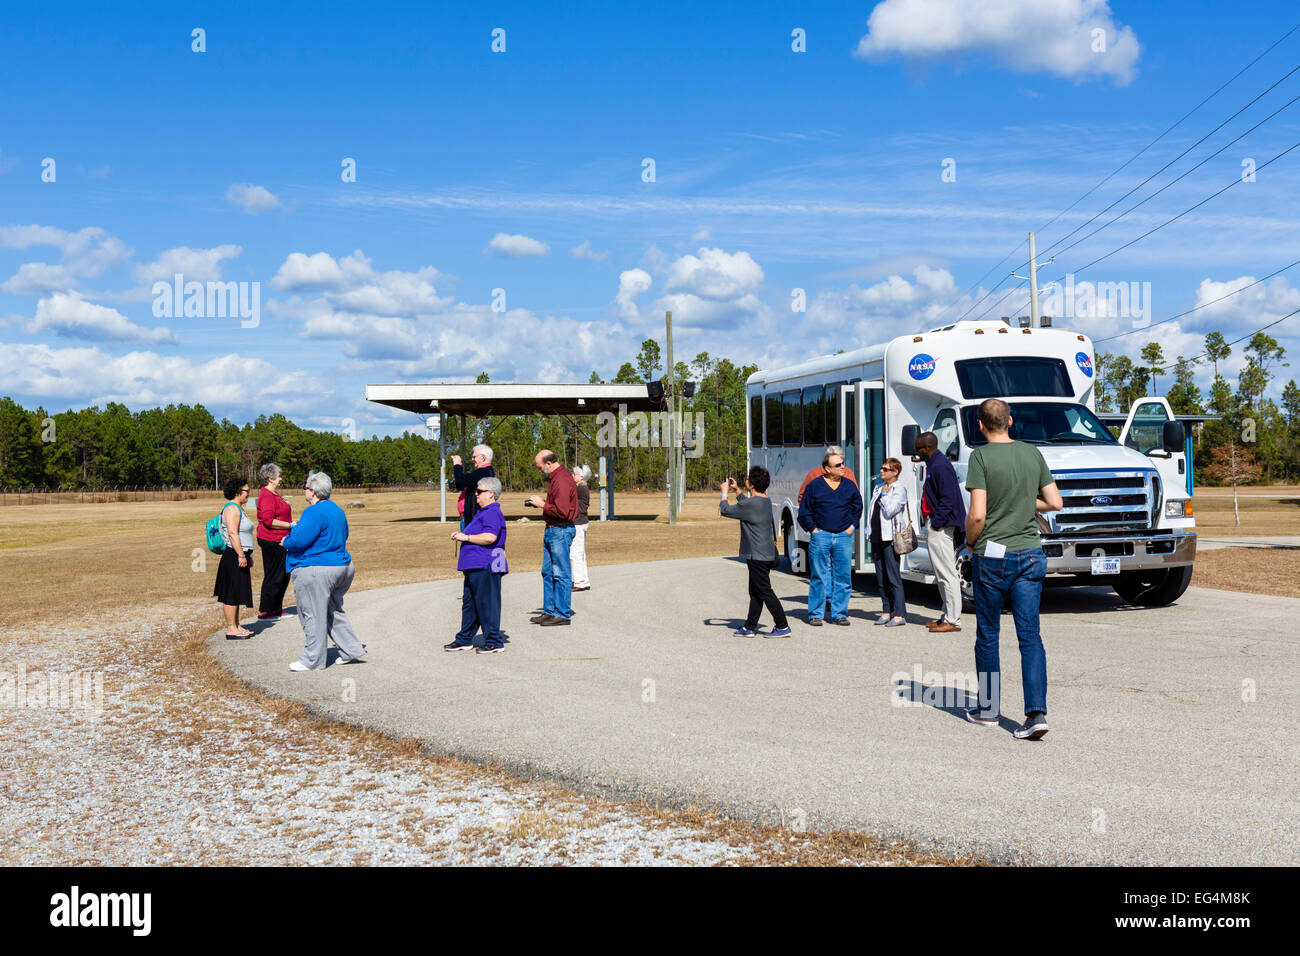 Visitors in front of tour bus on guided tour of John C Stennis Space Center, Hancock County, Mississippi, USA Stock Photo